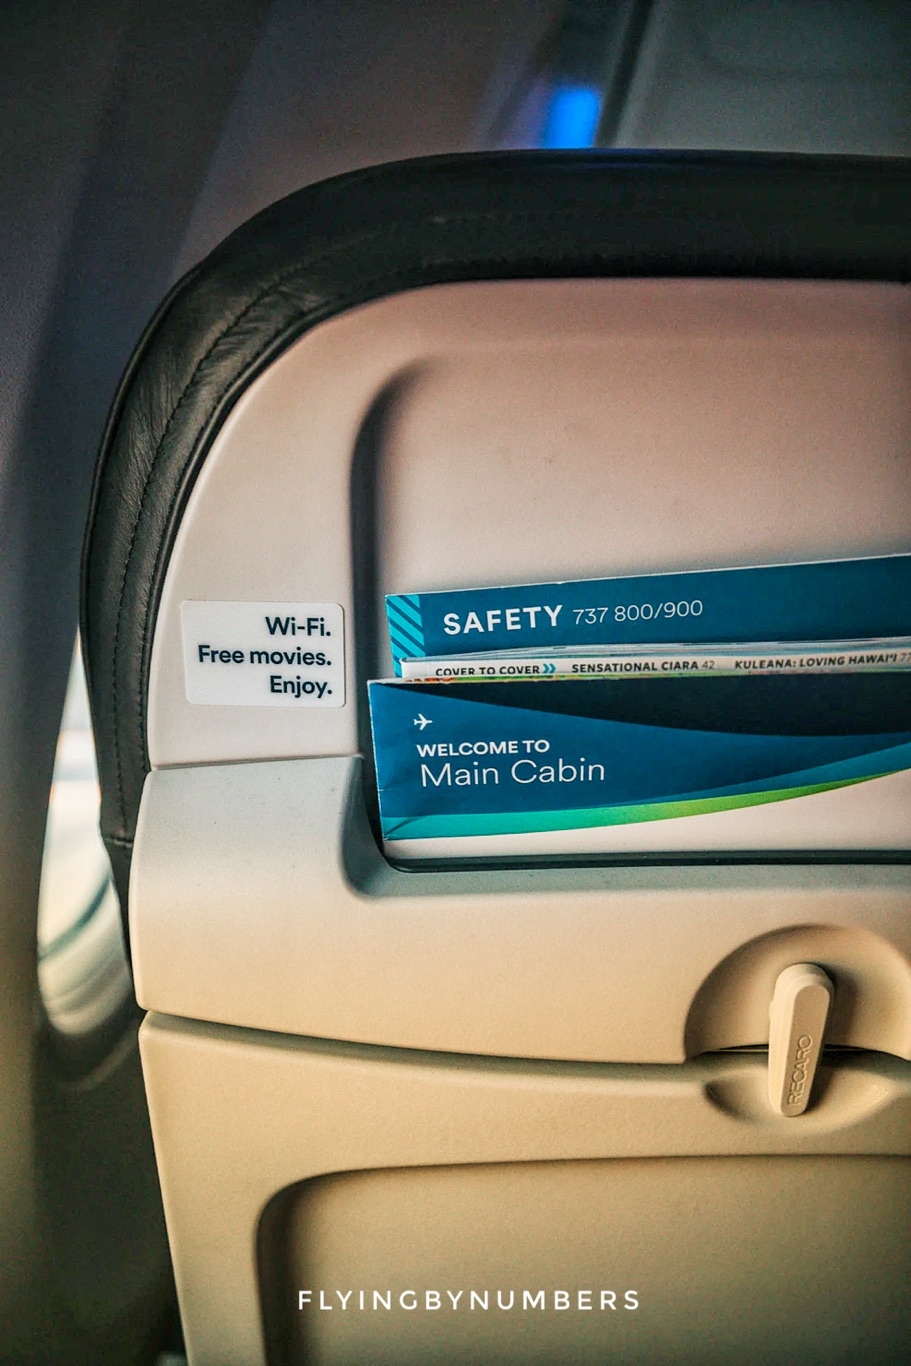 Safety cards from a Boeing 737 800/900